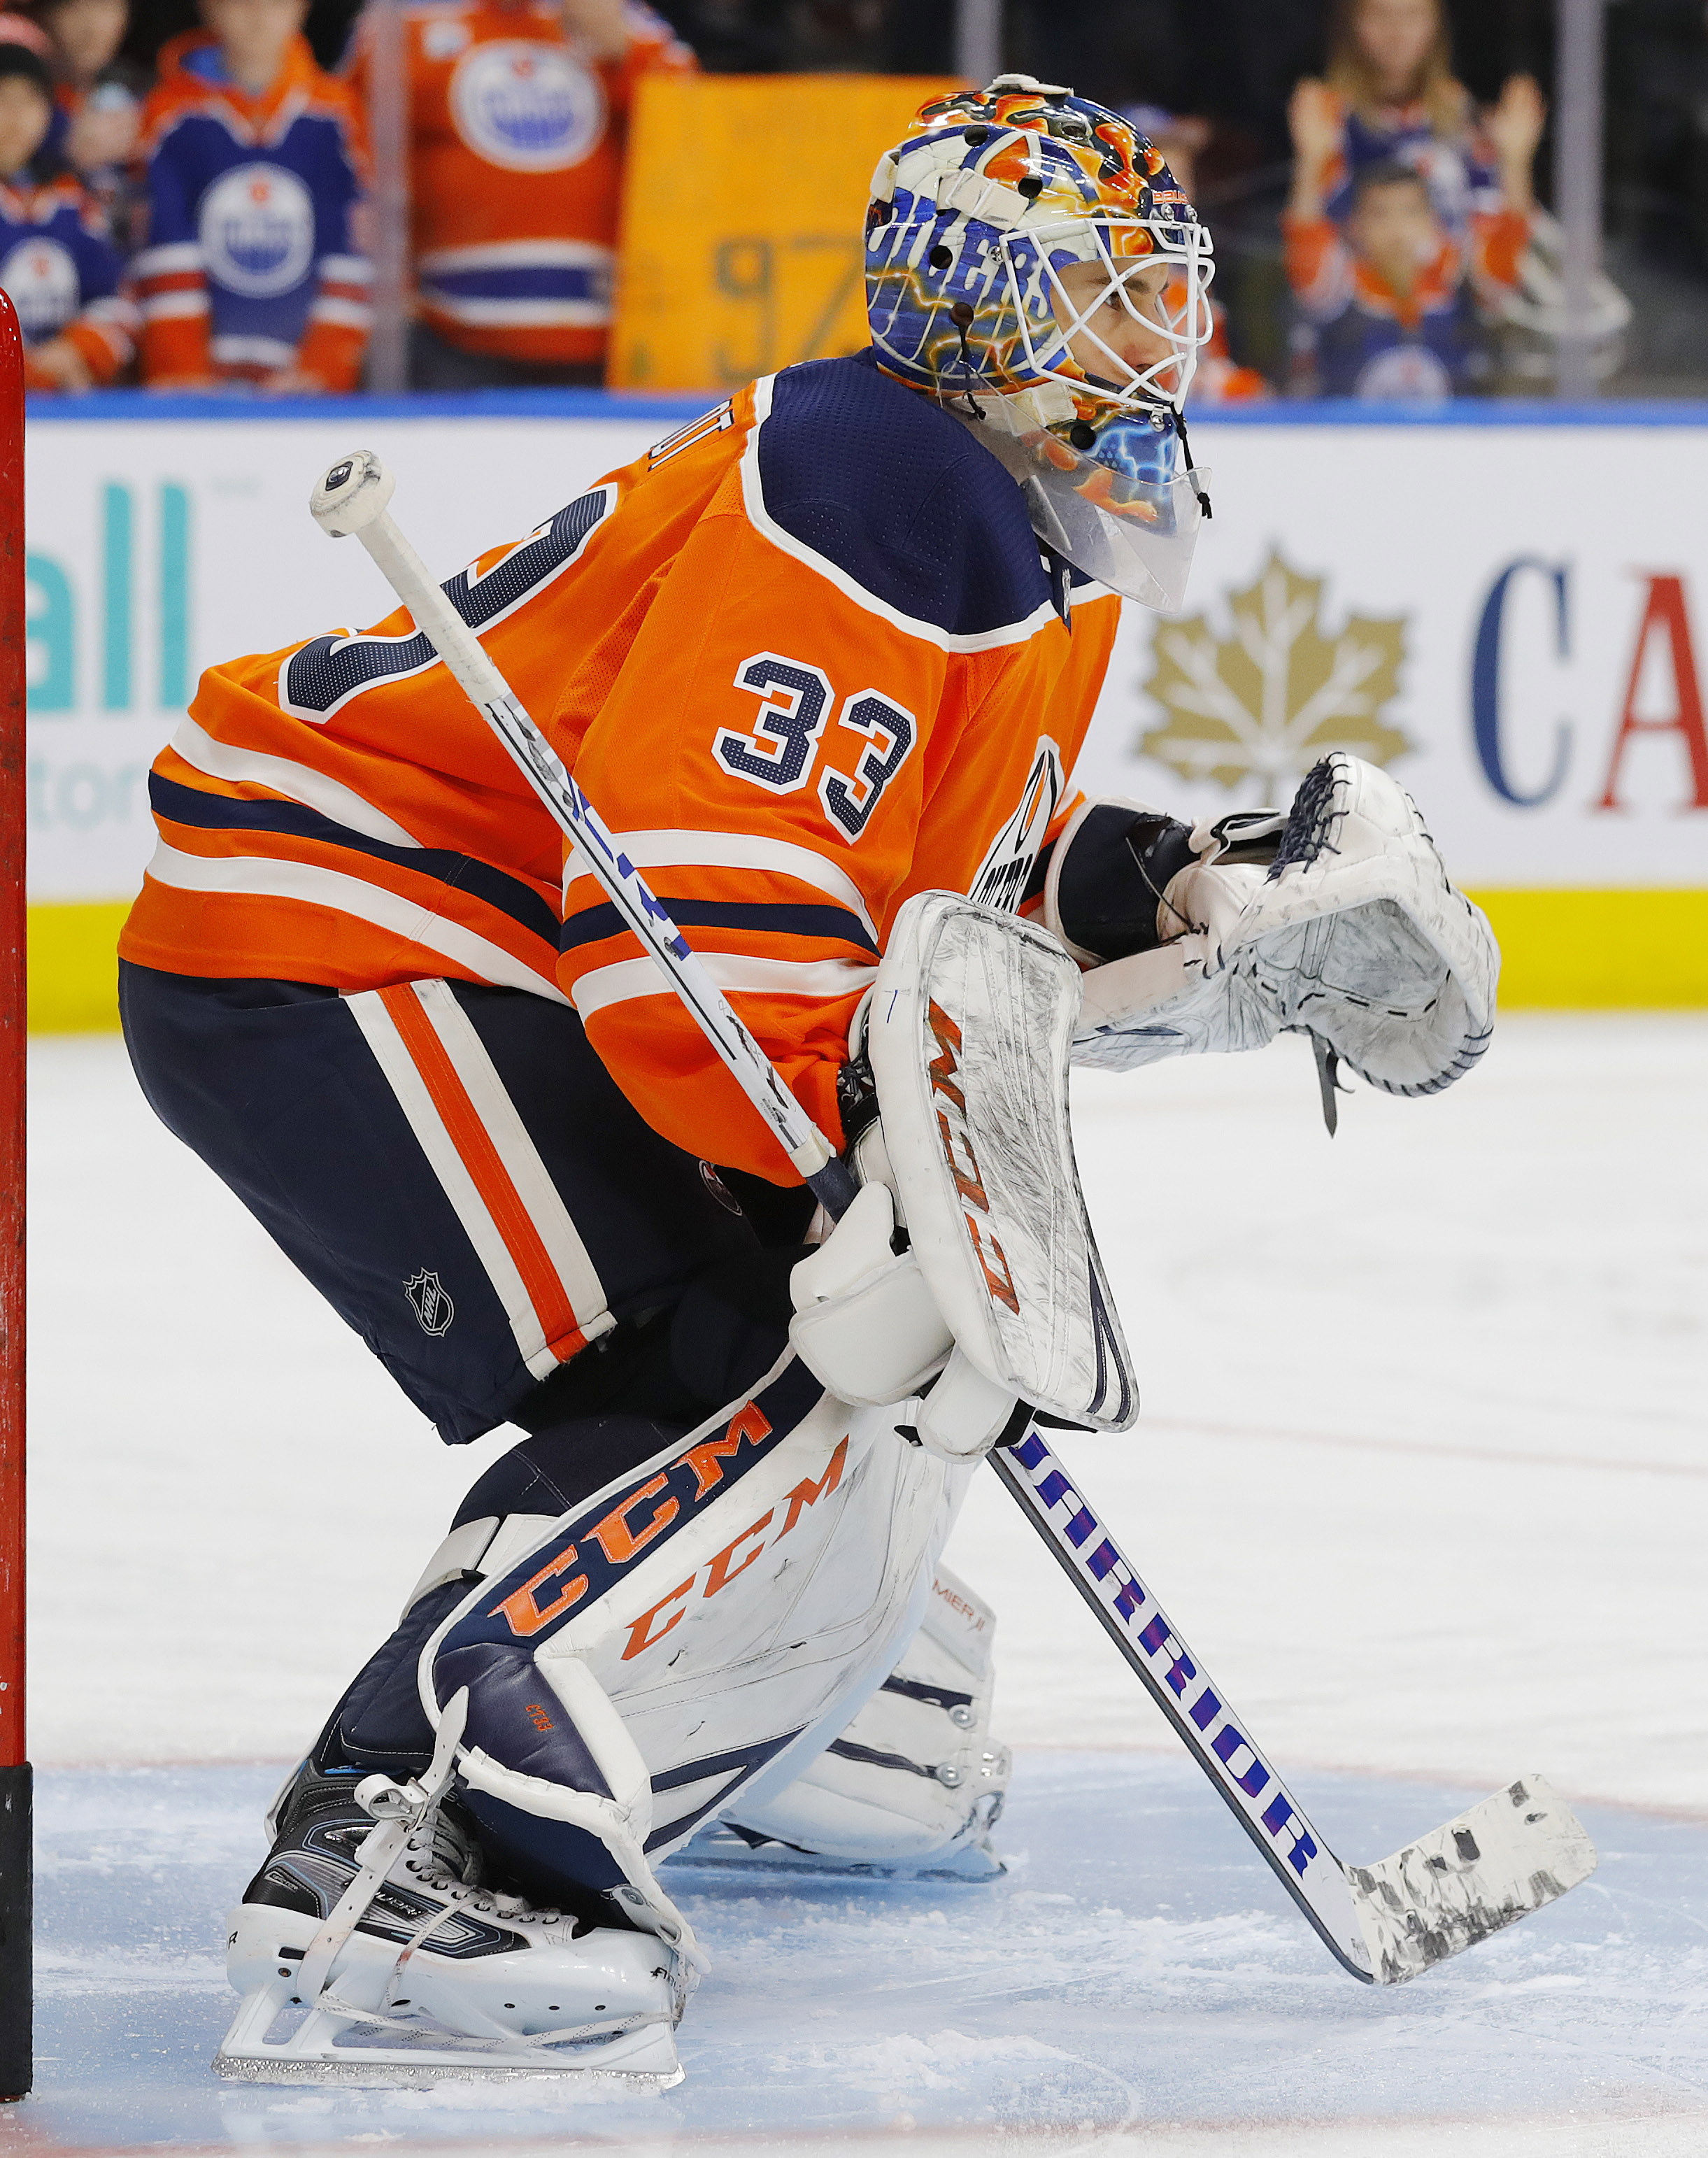 With Cam Talbot in Net, Rangers Continue Mastery of Flyers at the